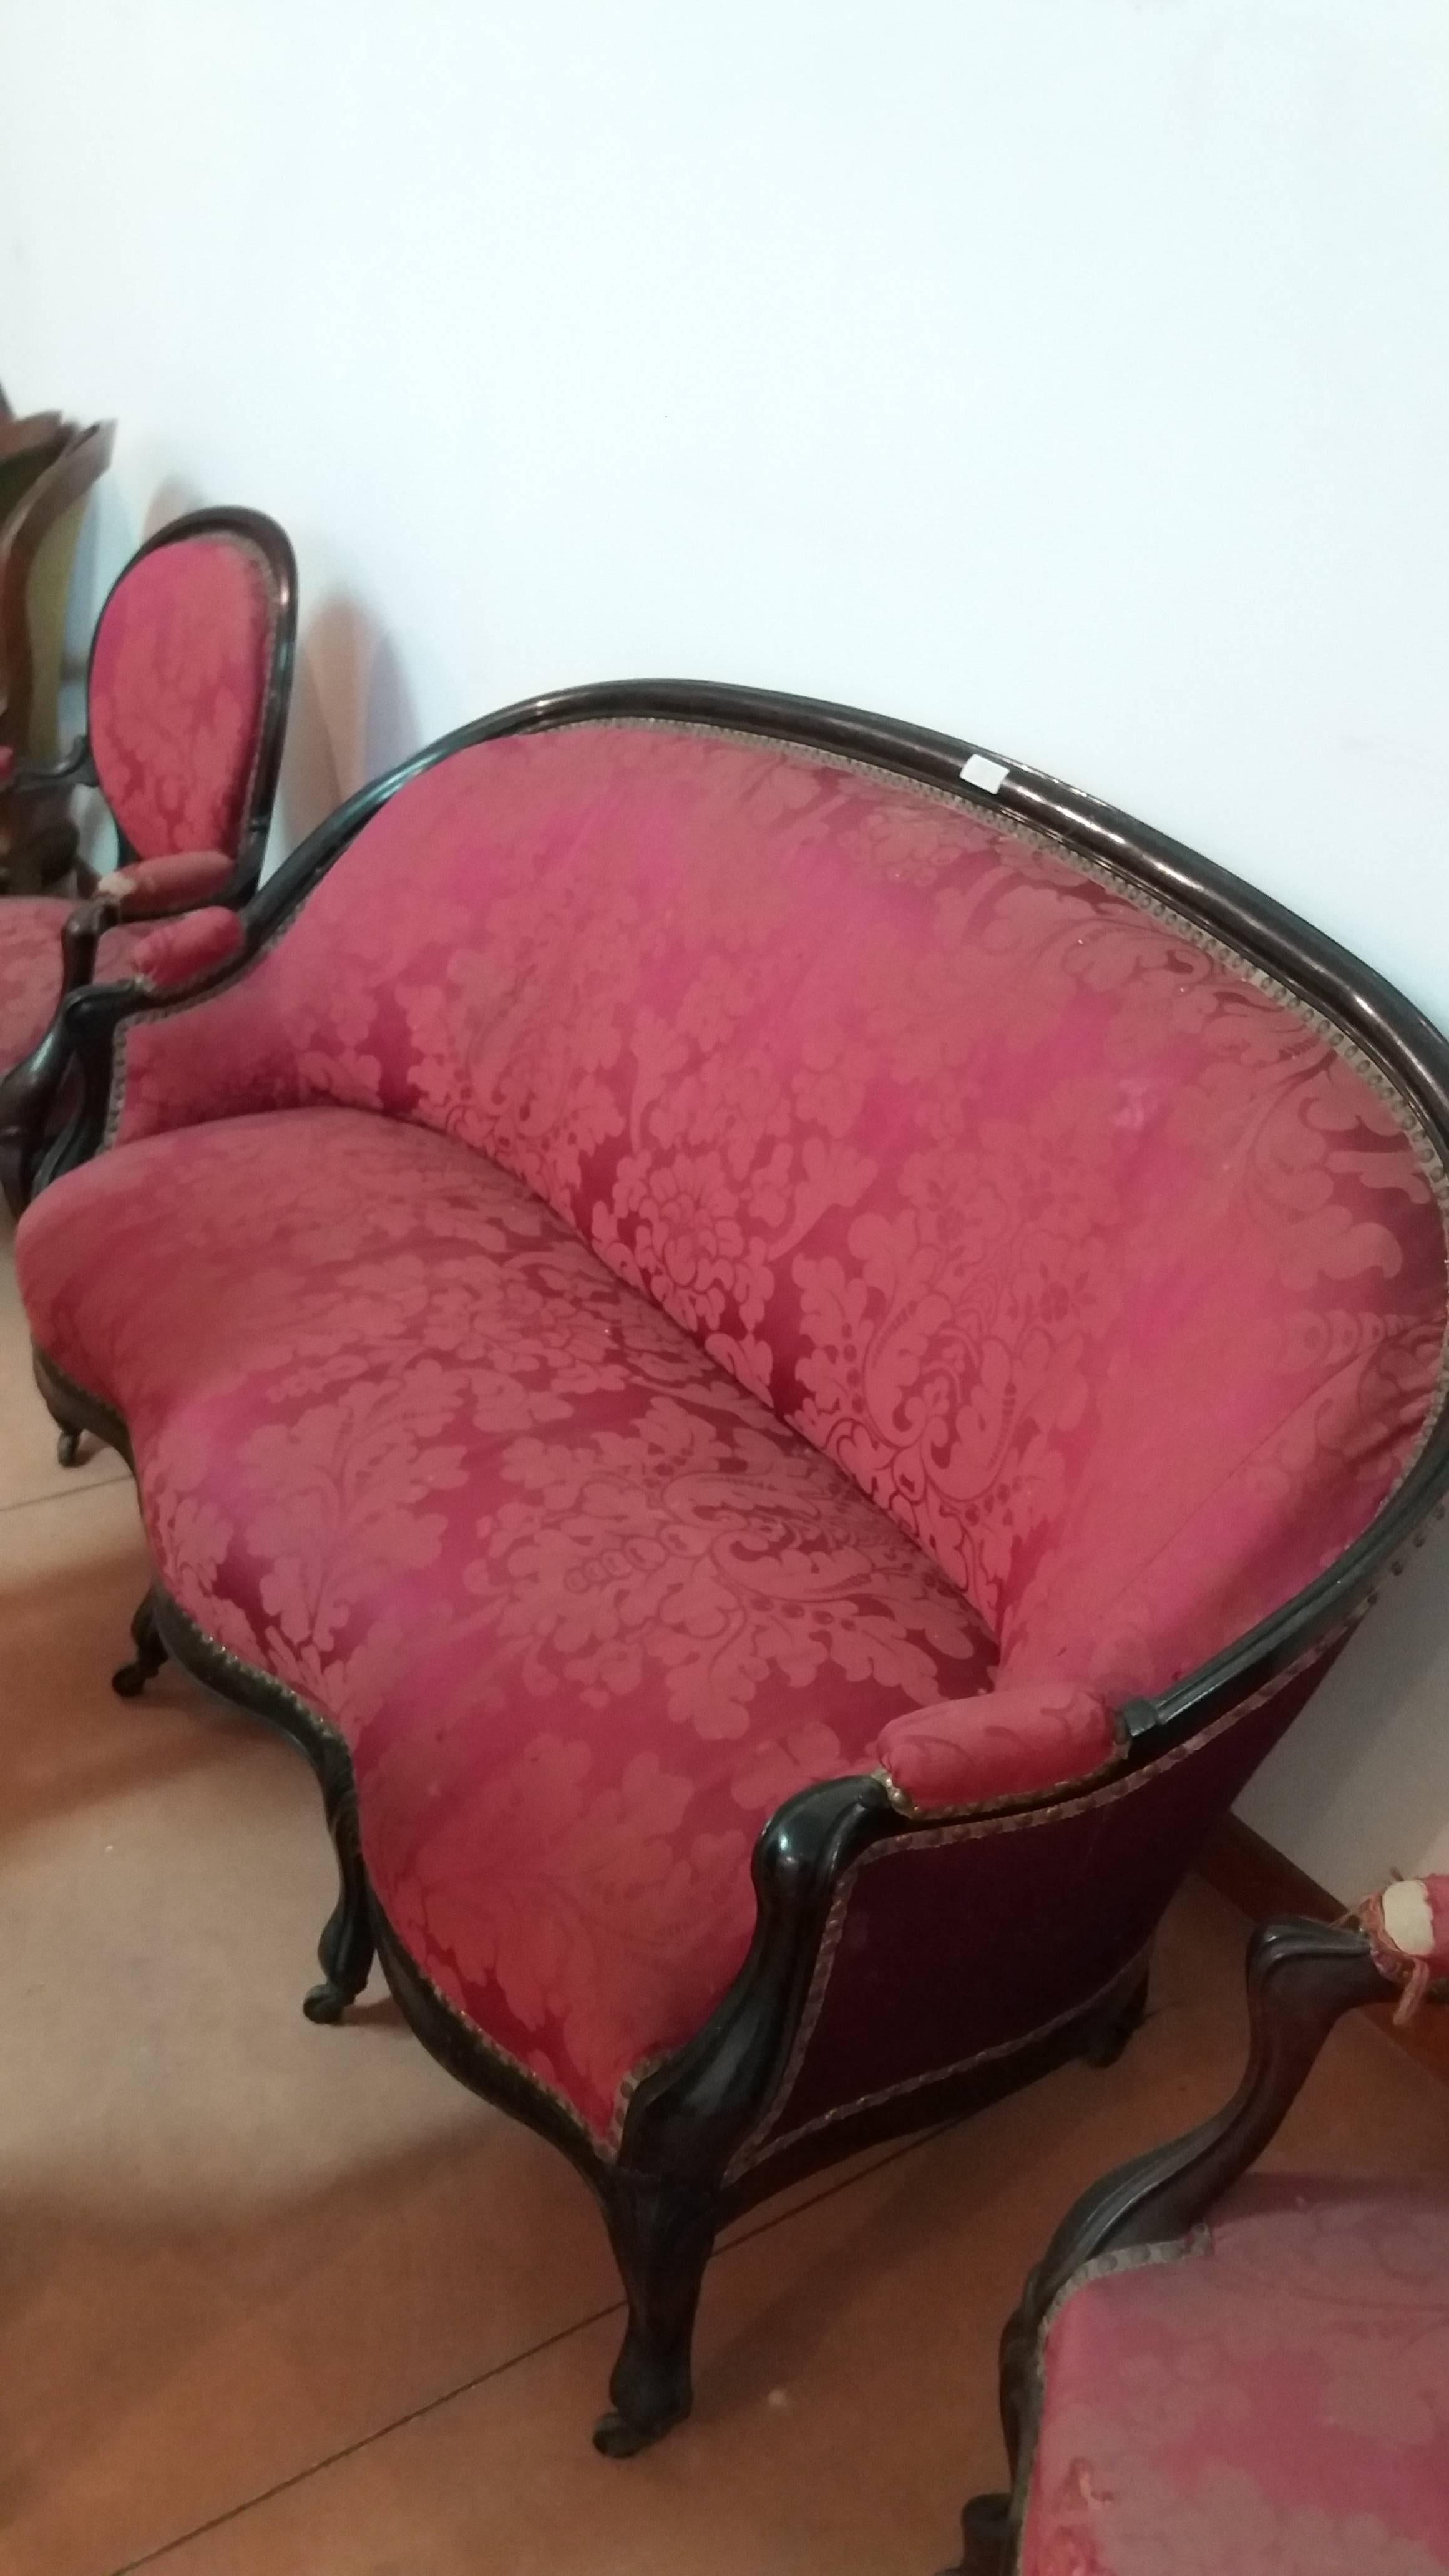 19th century French palissander set of two armchairs six chairs one sofa
It has to be restore
The restauration takes one months
We have available many set of sofa armchairs and chairs

Measurements: Chair: Depth 50cm, width 50 cm, high 90 cm.
